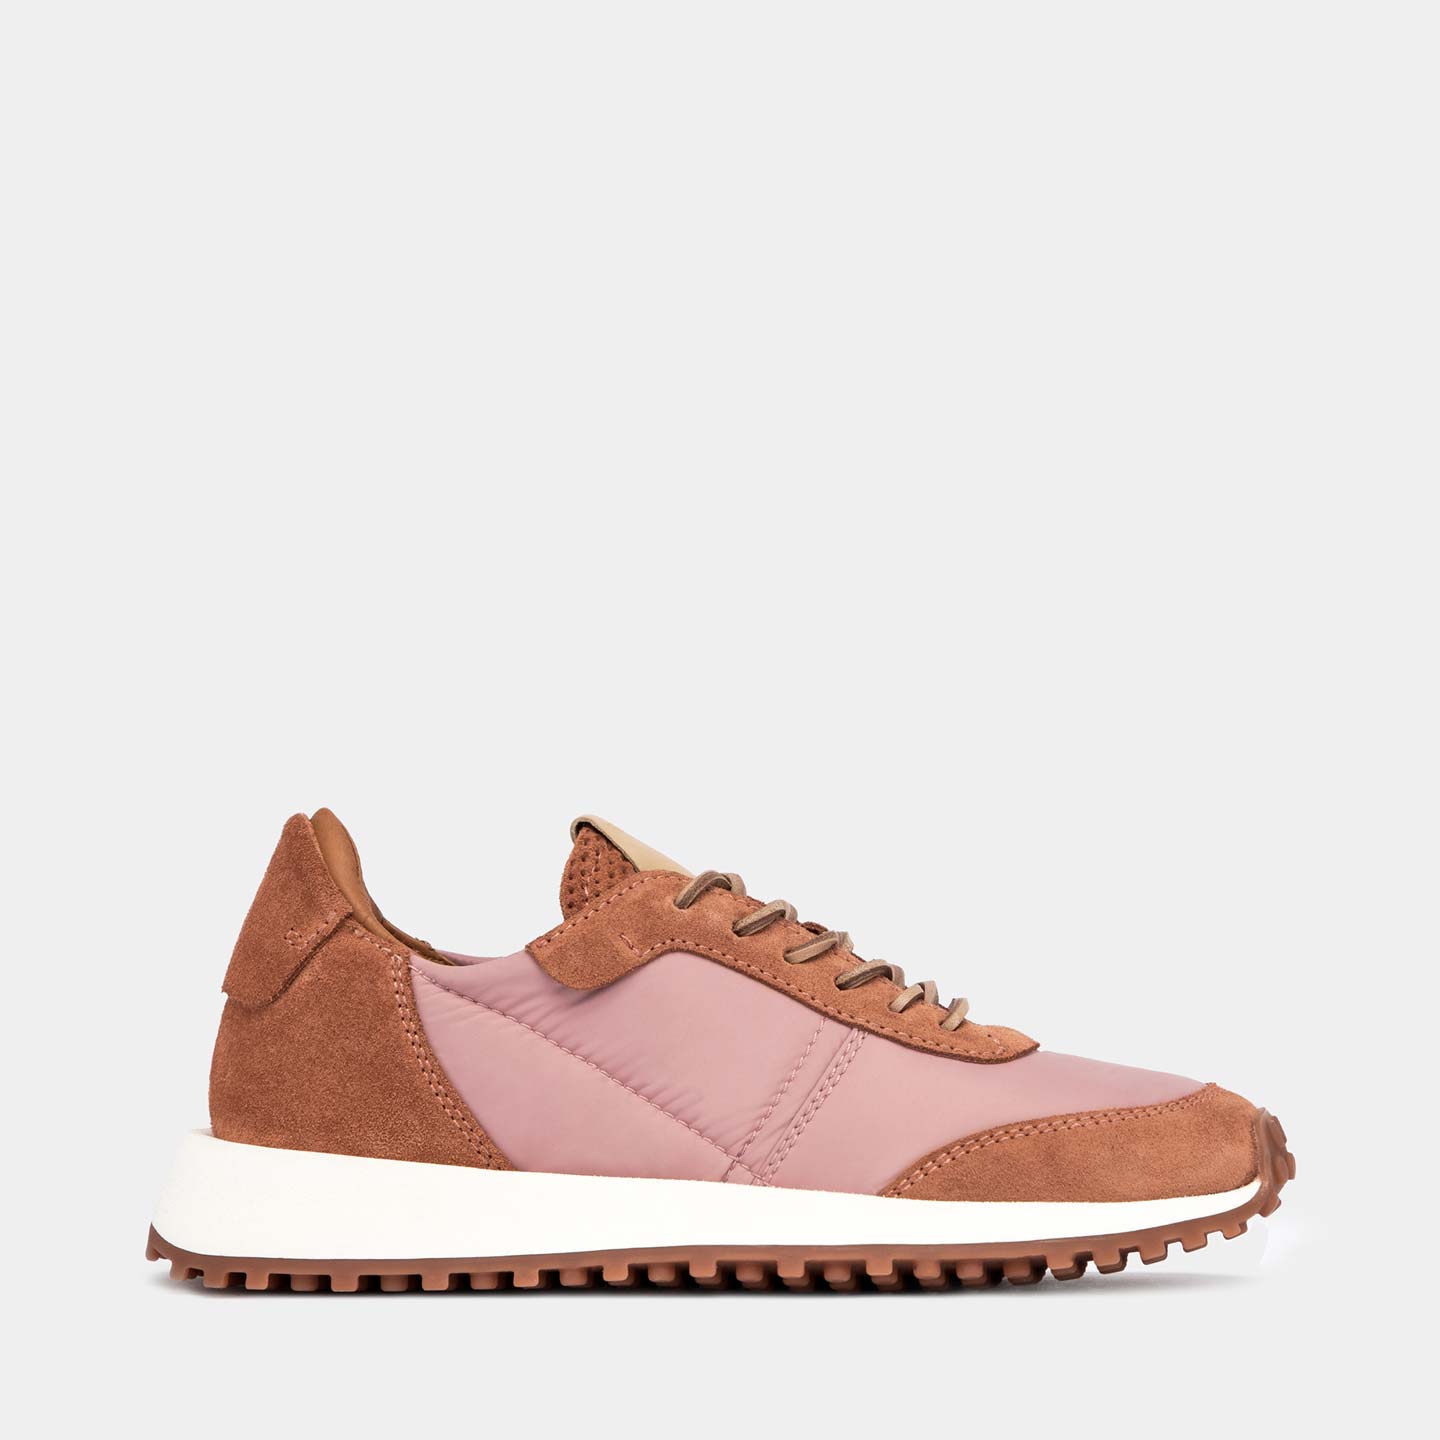 Frontier Ynkelig barriere BUTTERO FUTURA SNEAKERS IN NYLON AND SUEDE TAN B10391VARB-DG1/B-TAN